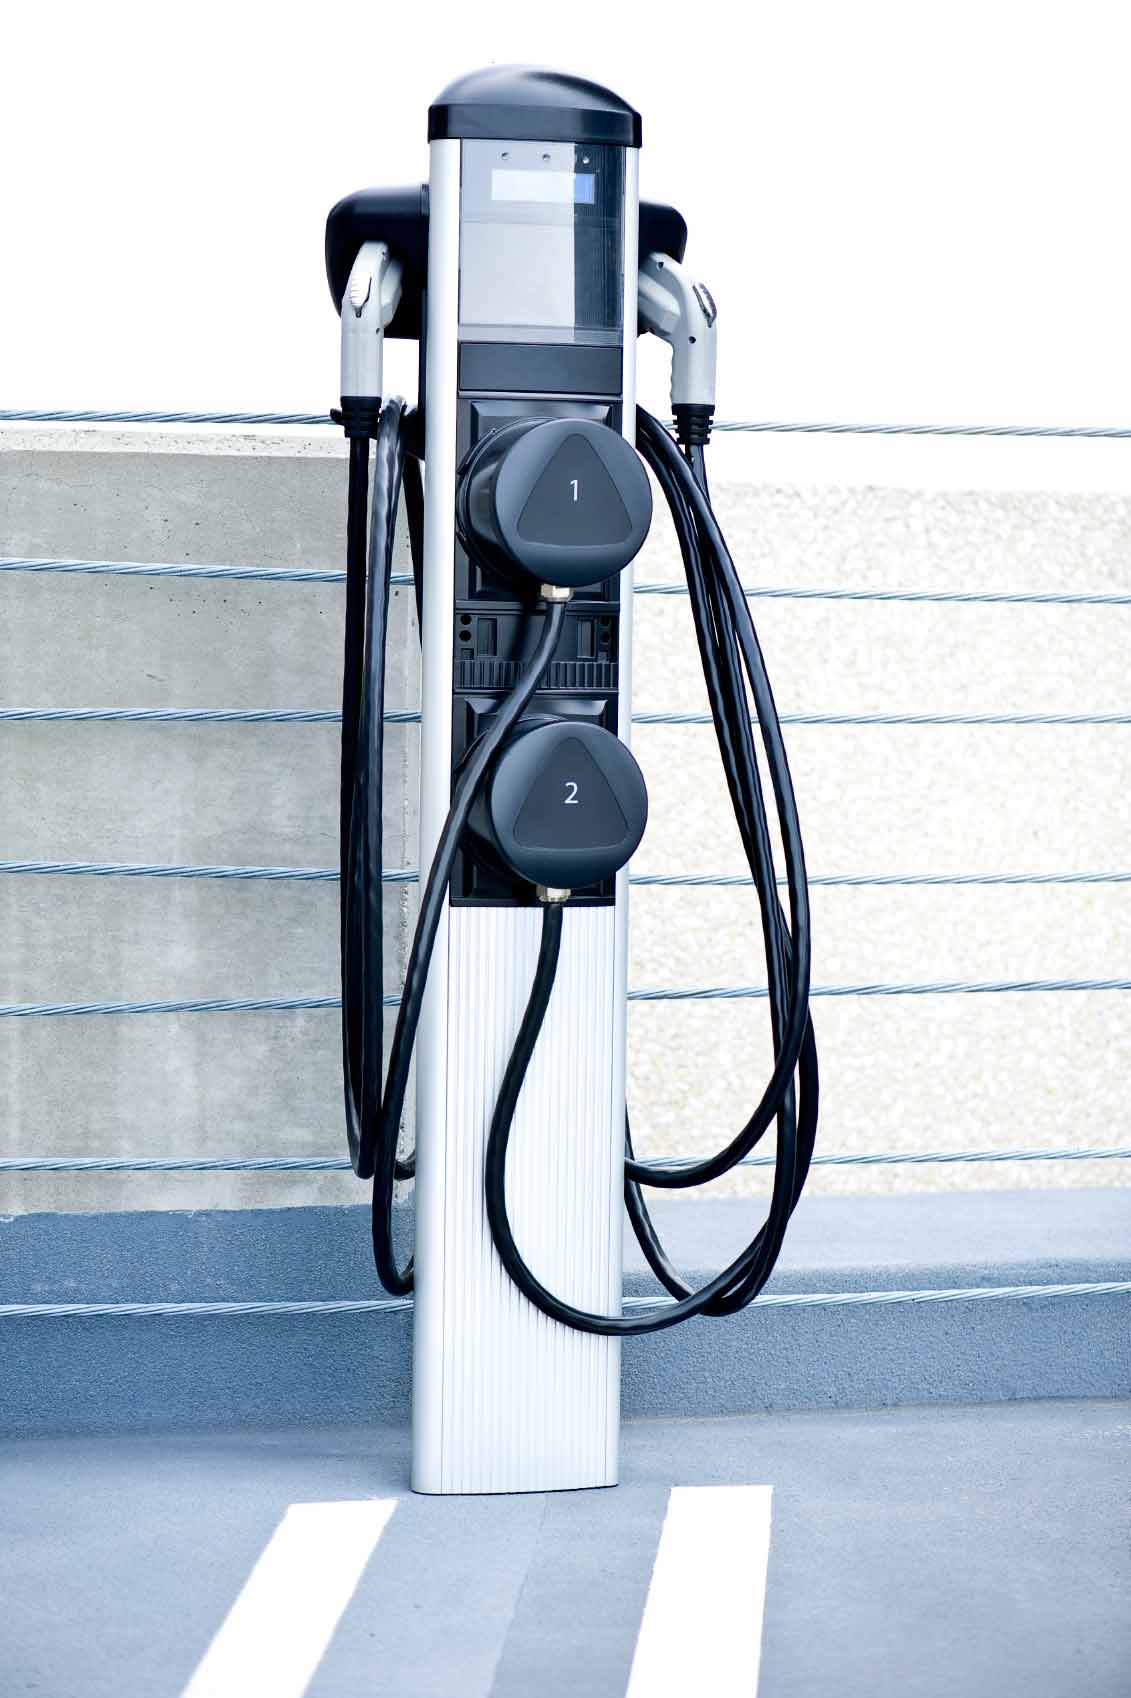 Ivey Engineering Unveils New Electric Vehicle Charging Station Design